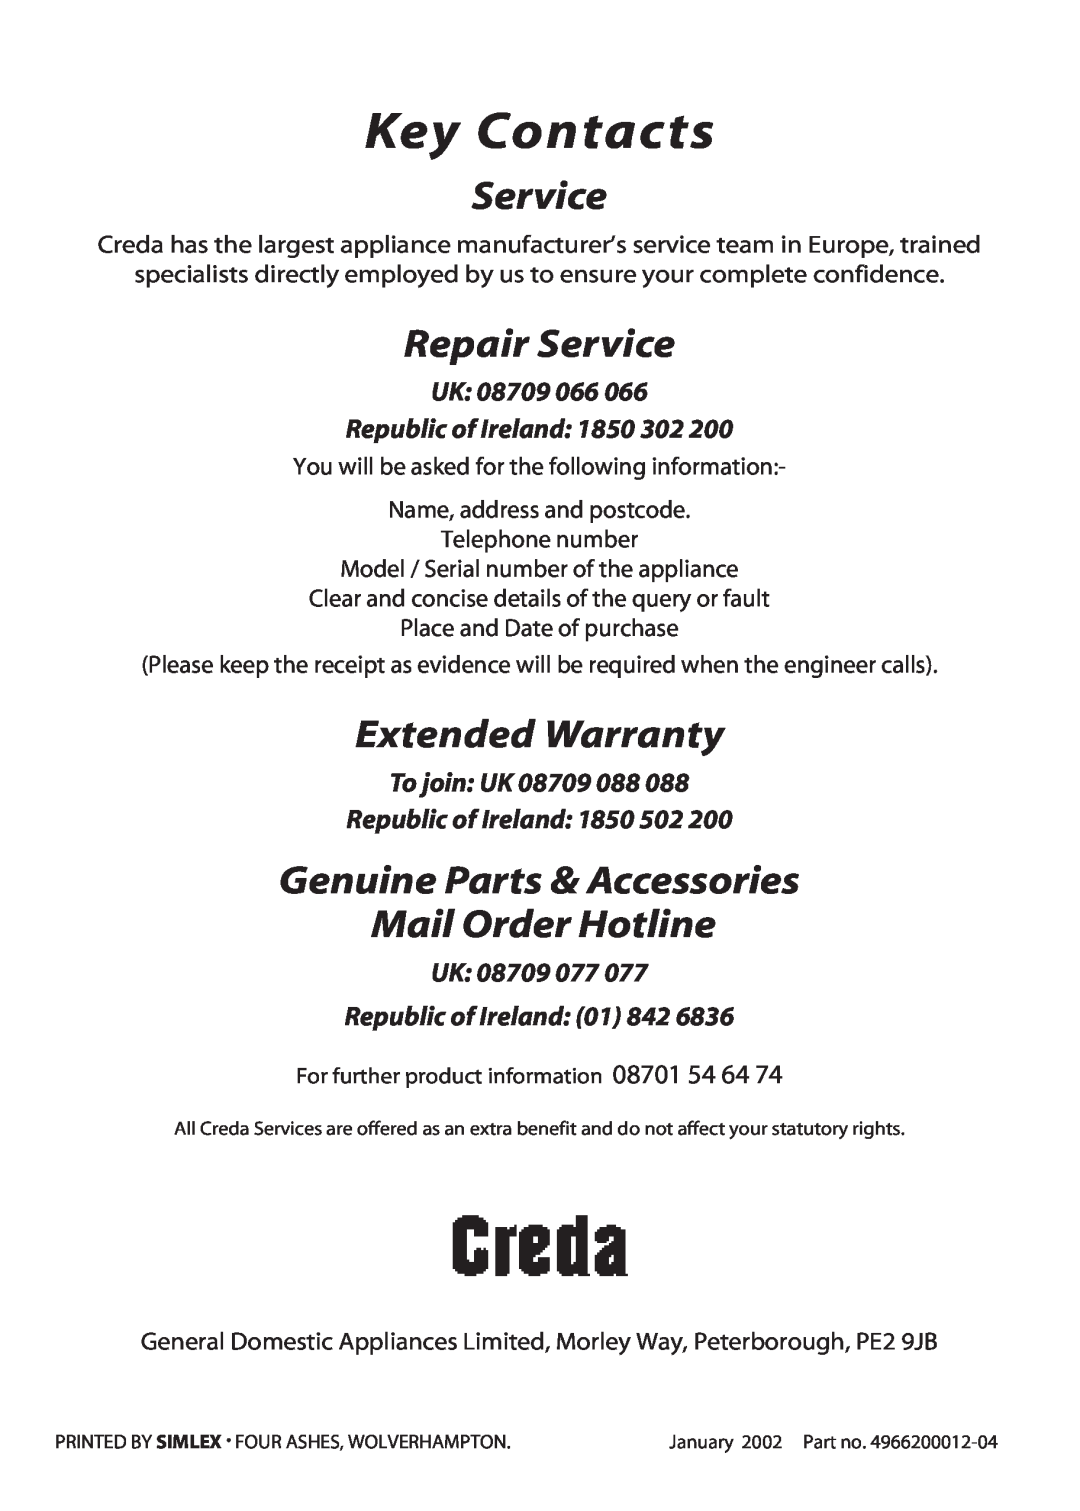 Creda X152E manual Key Contacts, Repair Service, Extended Warranty, Genuine Parts & Accessories Mail Order Hotline 